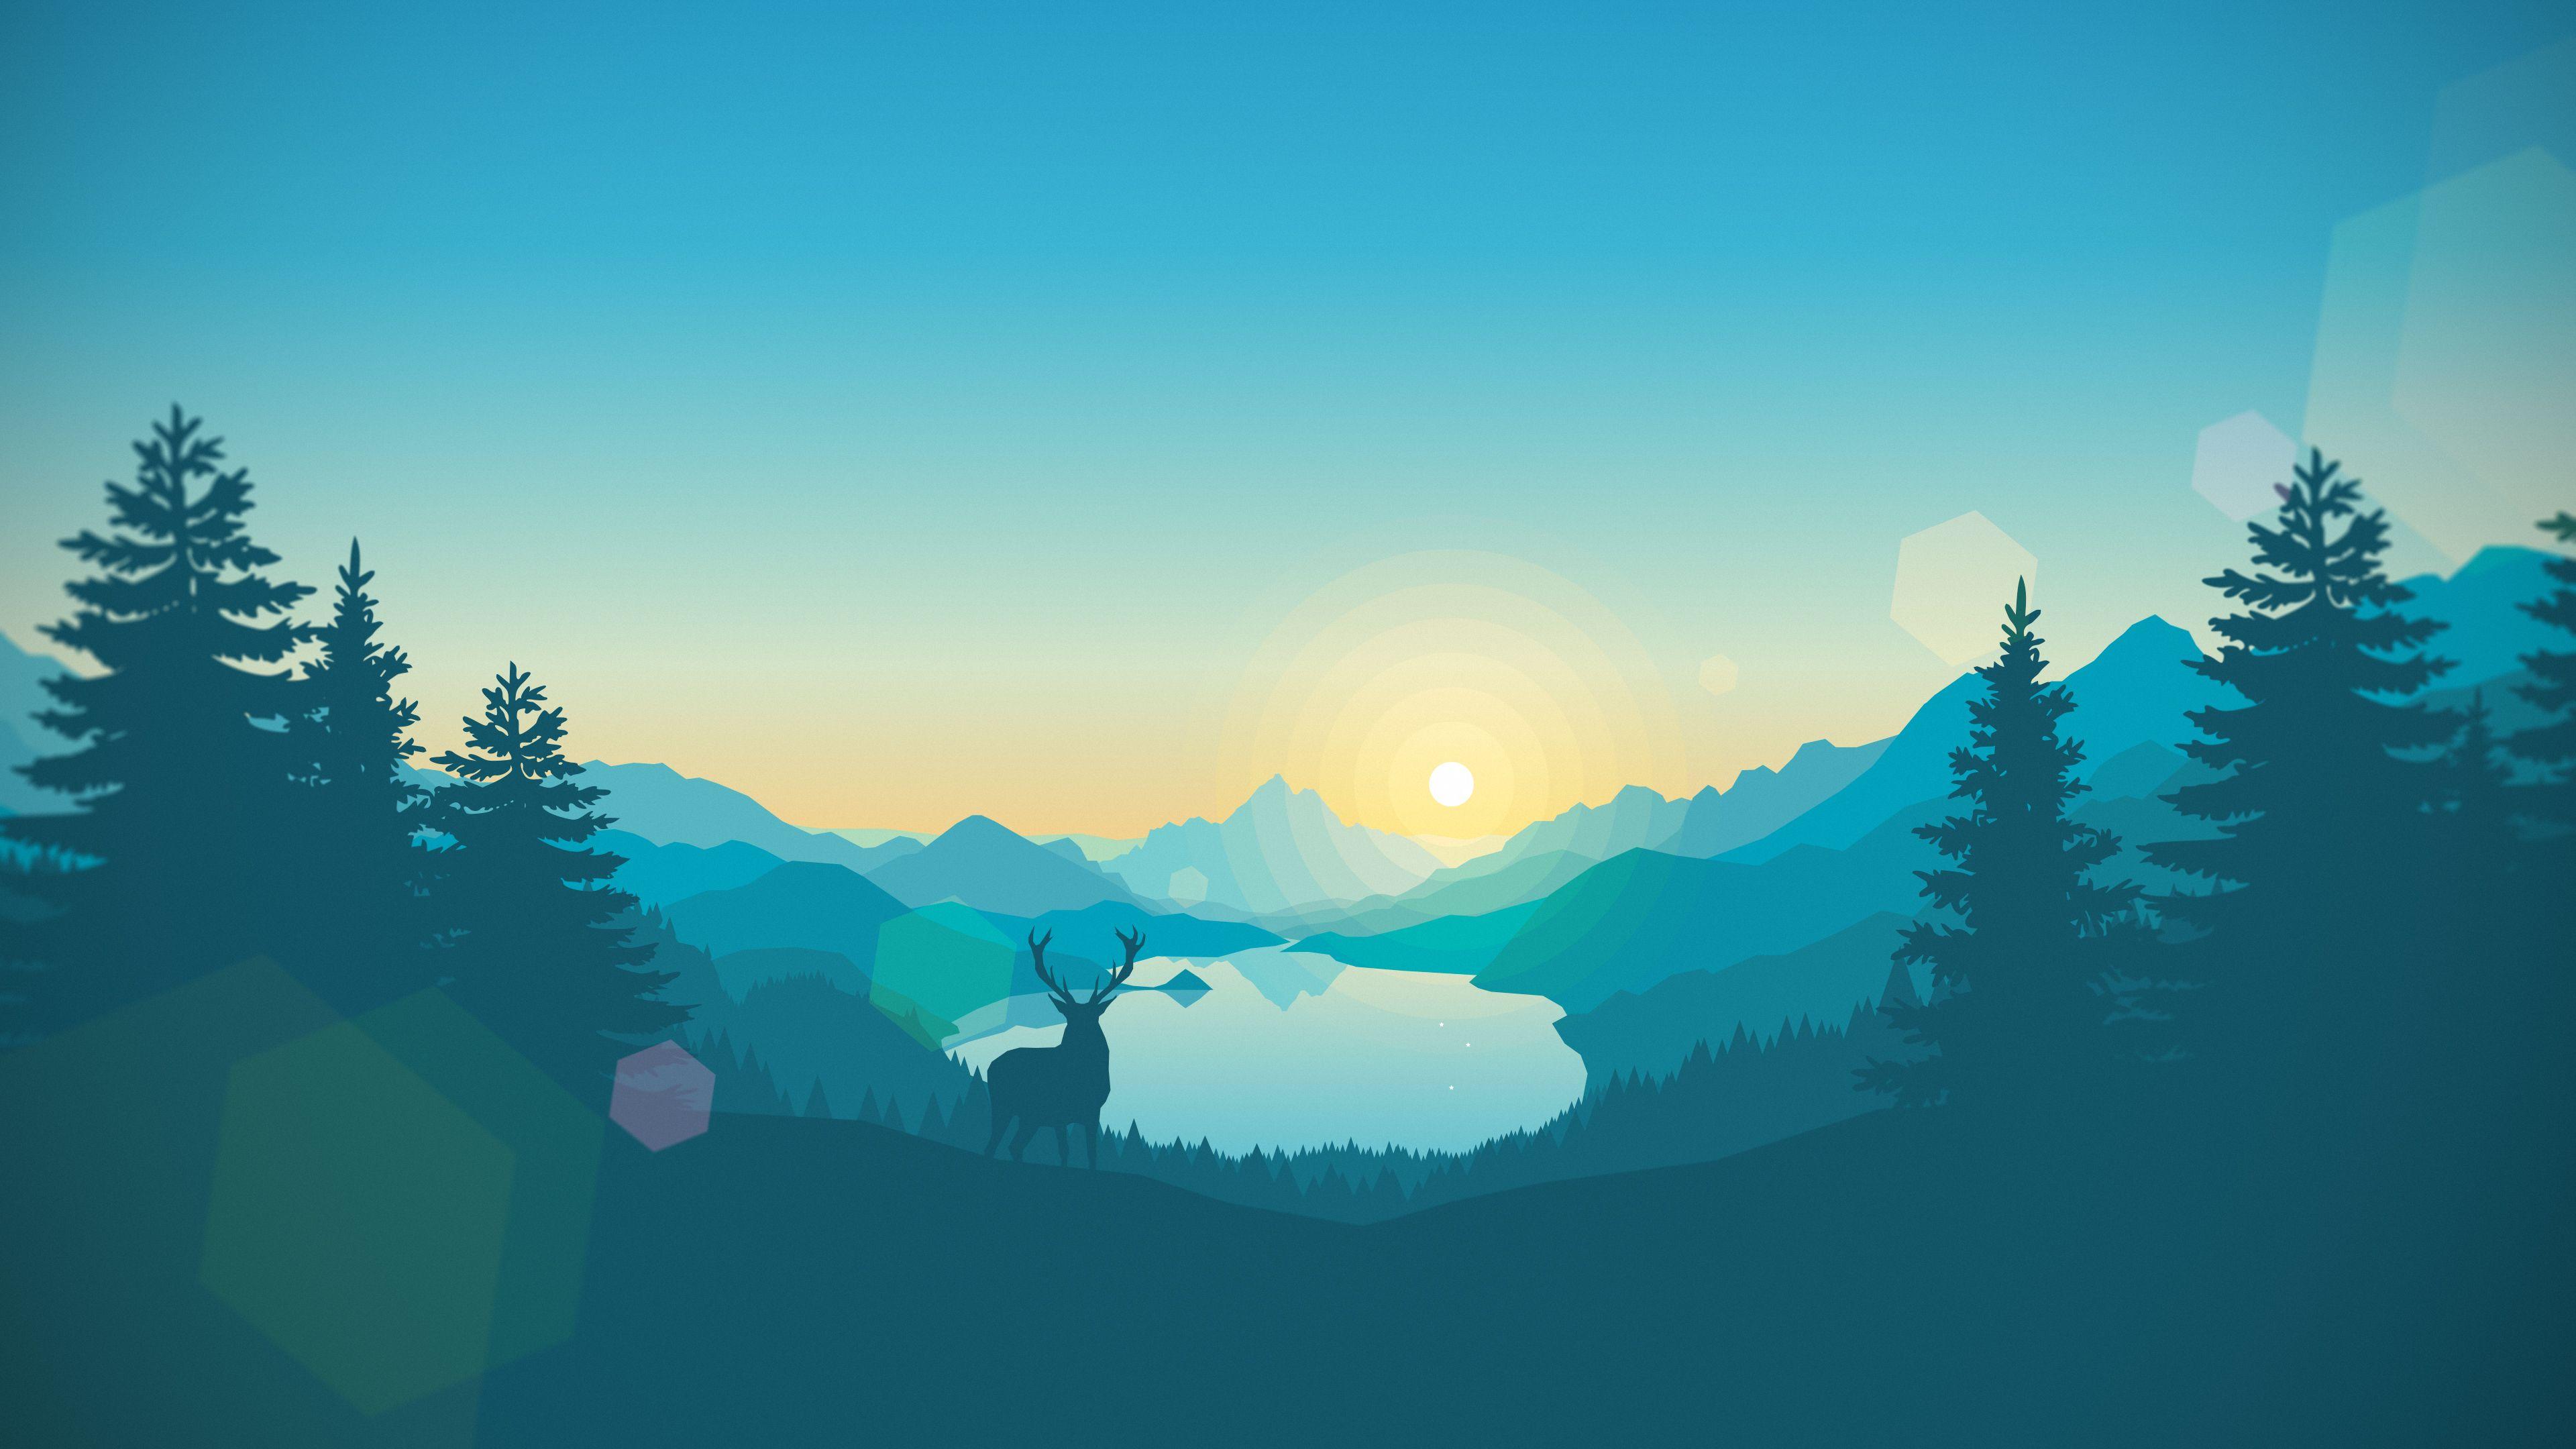 Download the Vector Stag Valley Wallpaper, Vector Stag Valley iPhone